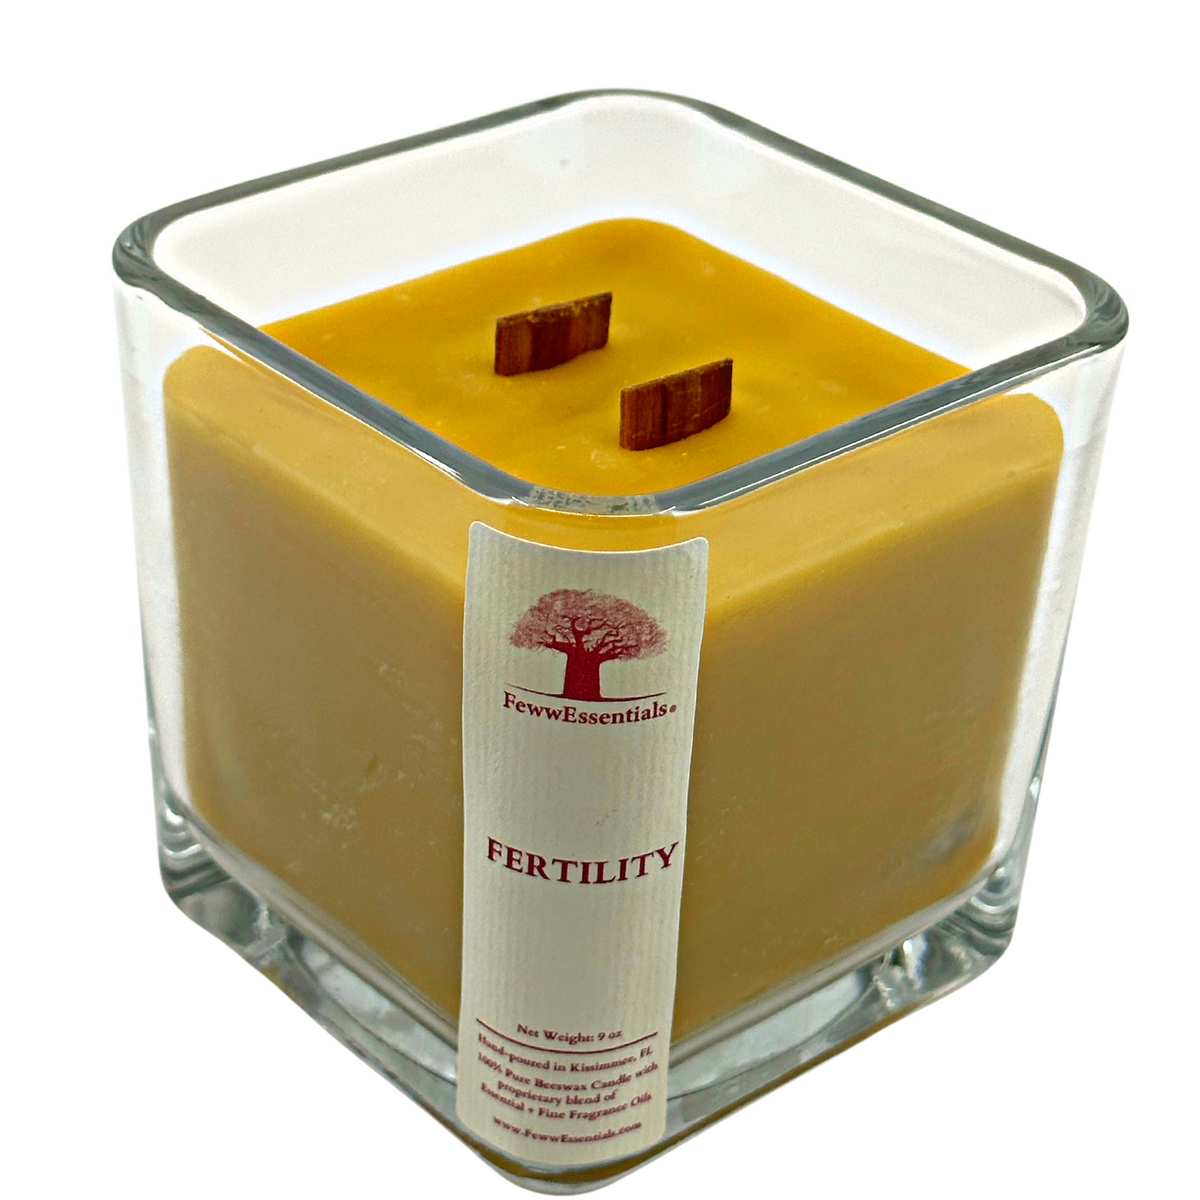 Buy fysio beeswax natural Online in Bahamas at Low Prices at desertcart